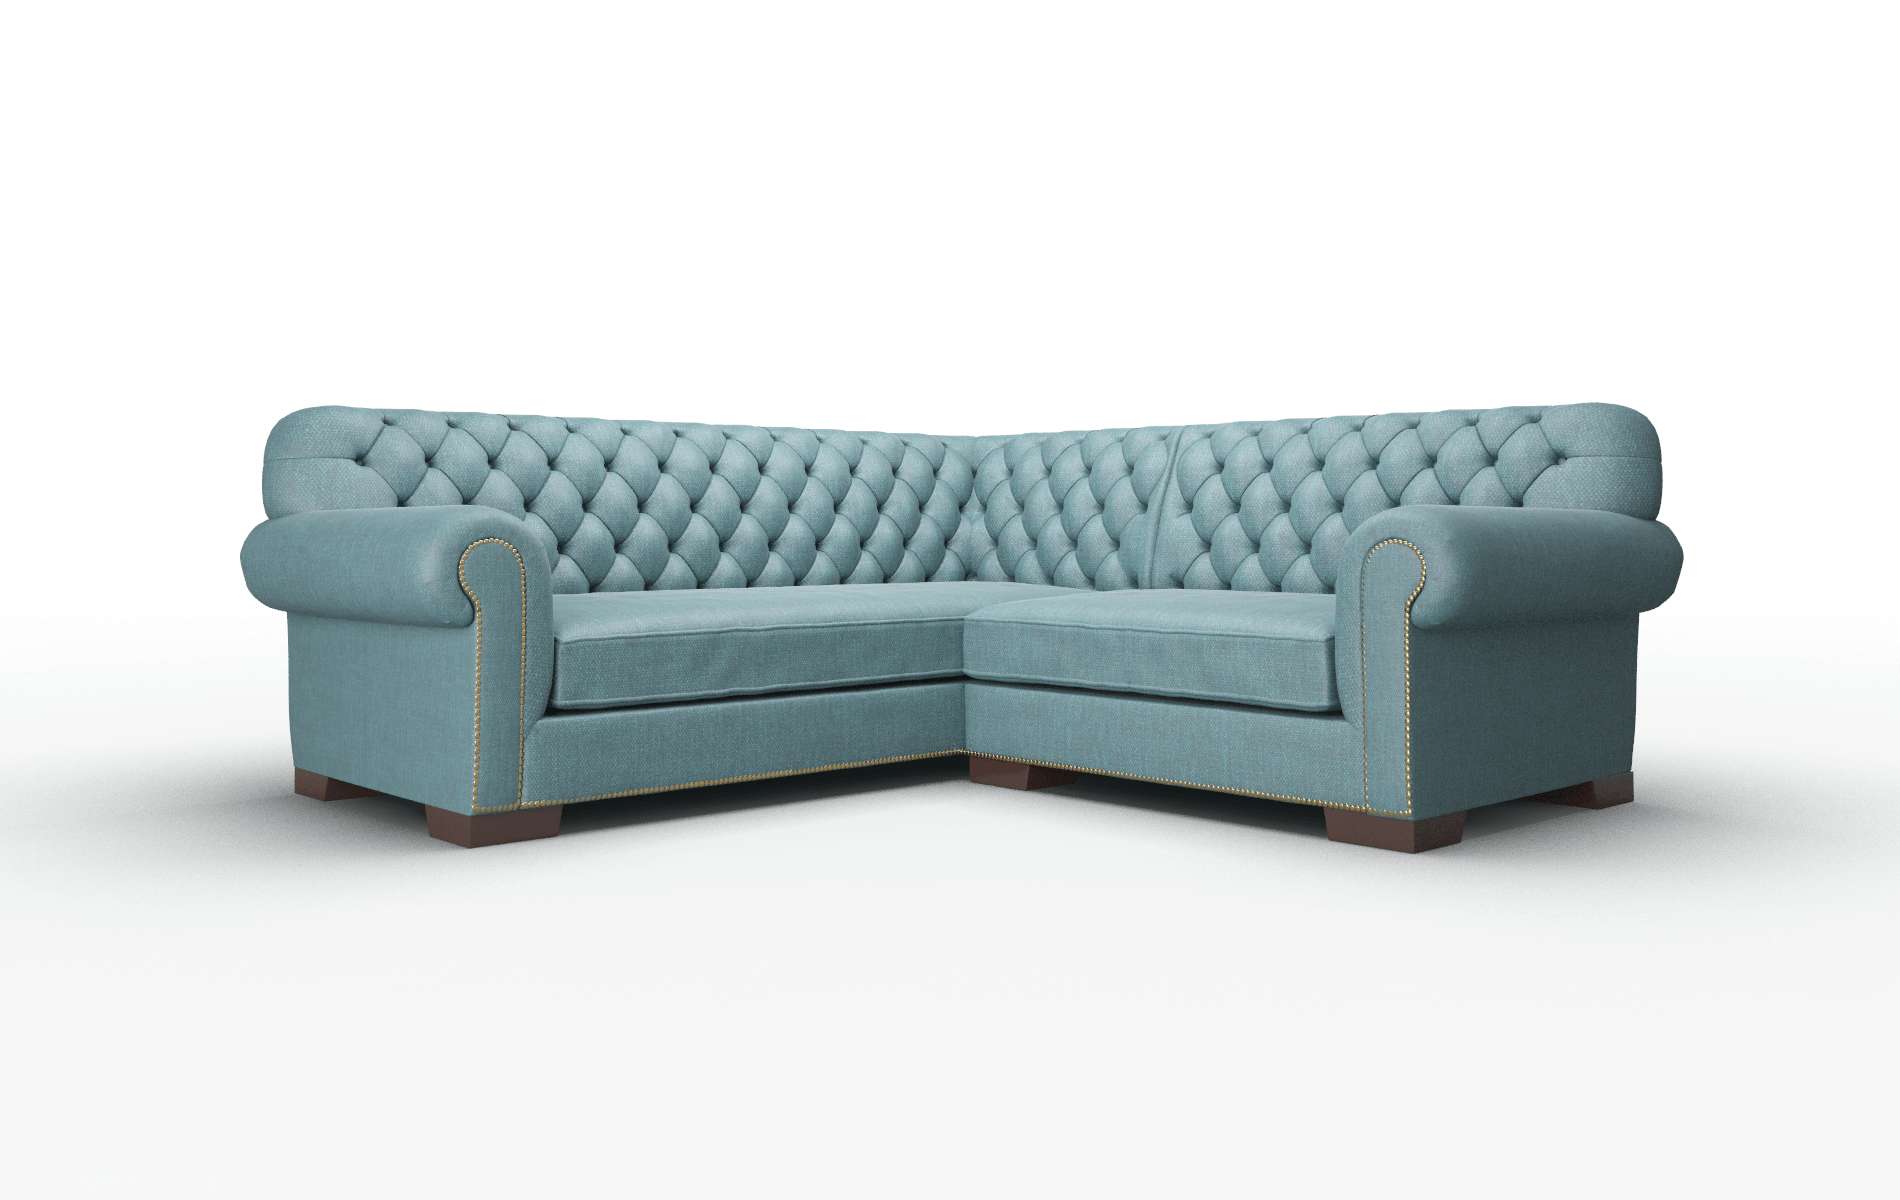 Chester Rocket Peacock Sectional espresso legs